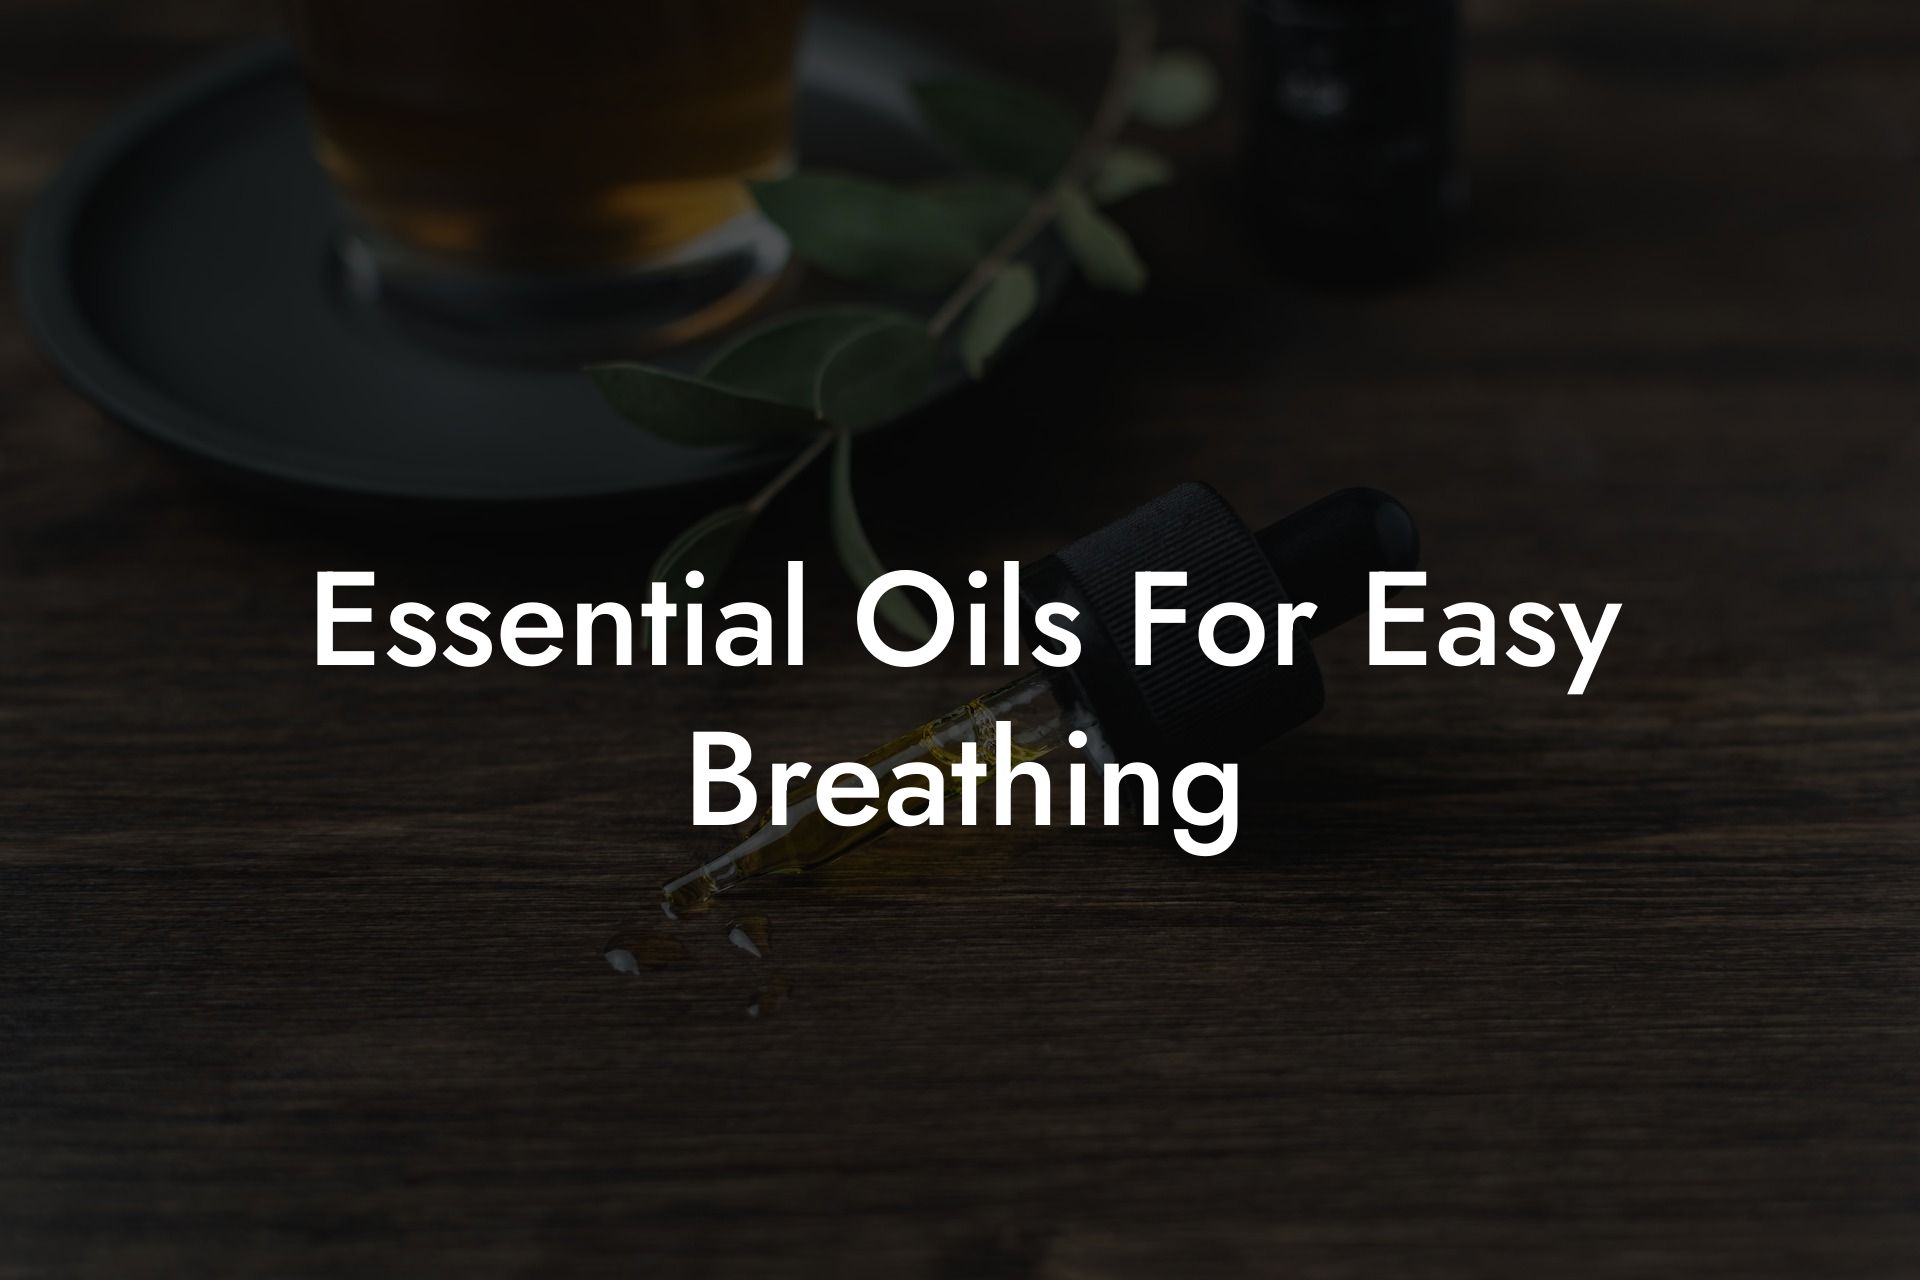 Essential Oils For Easy Breathing